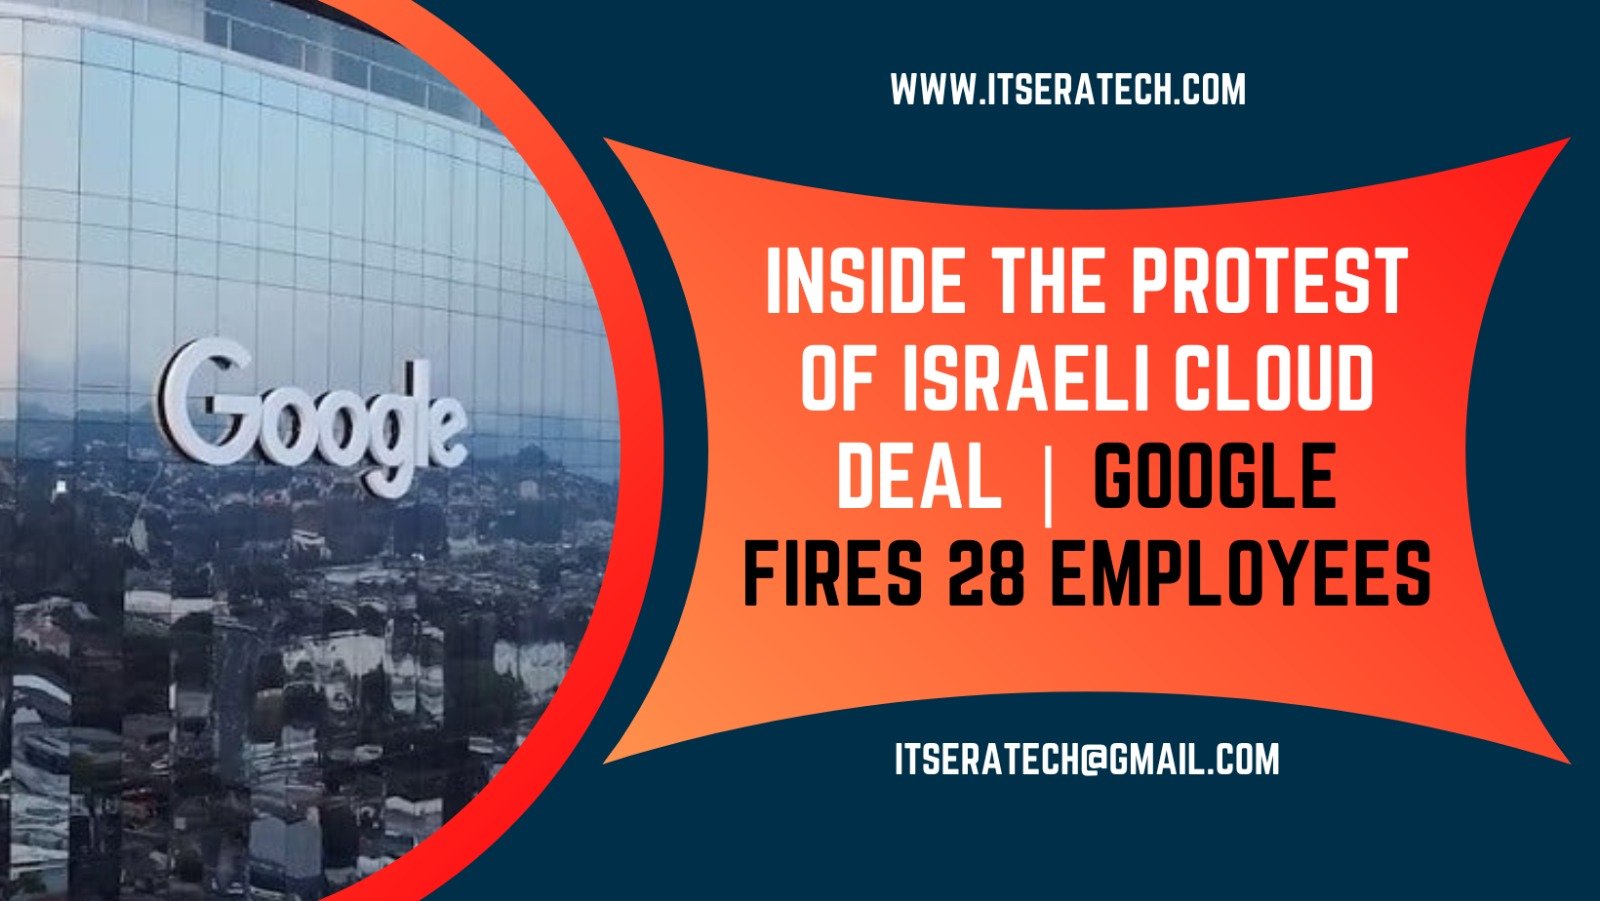 Inside The Protest Of Israeli Cloud Deal | Google Fires 28 Employees